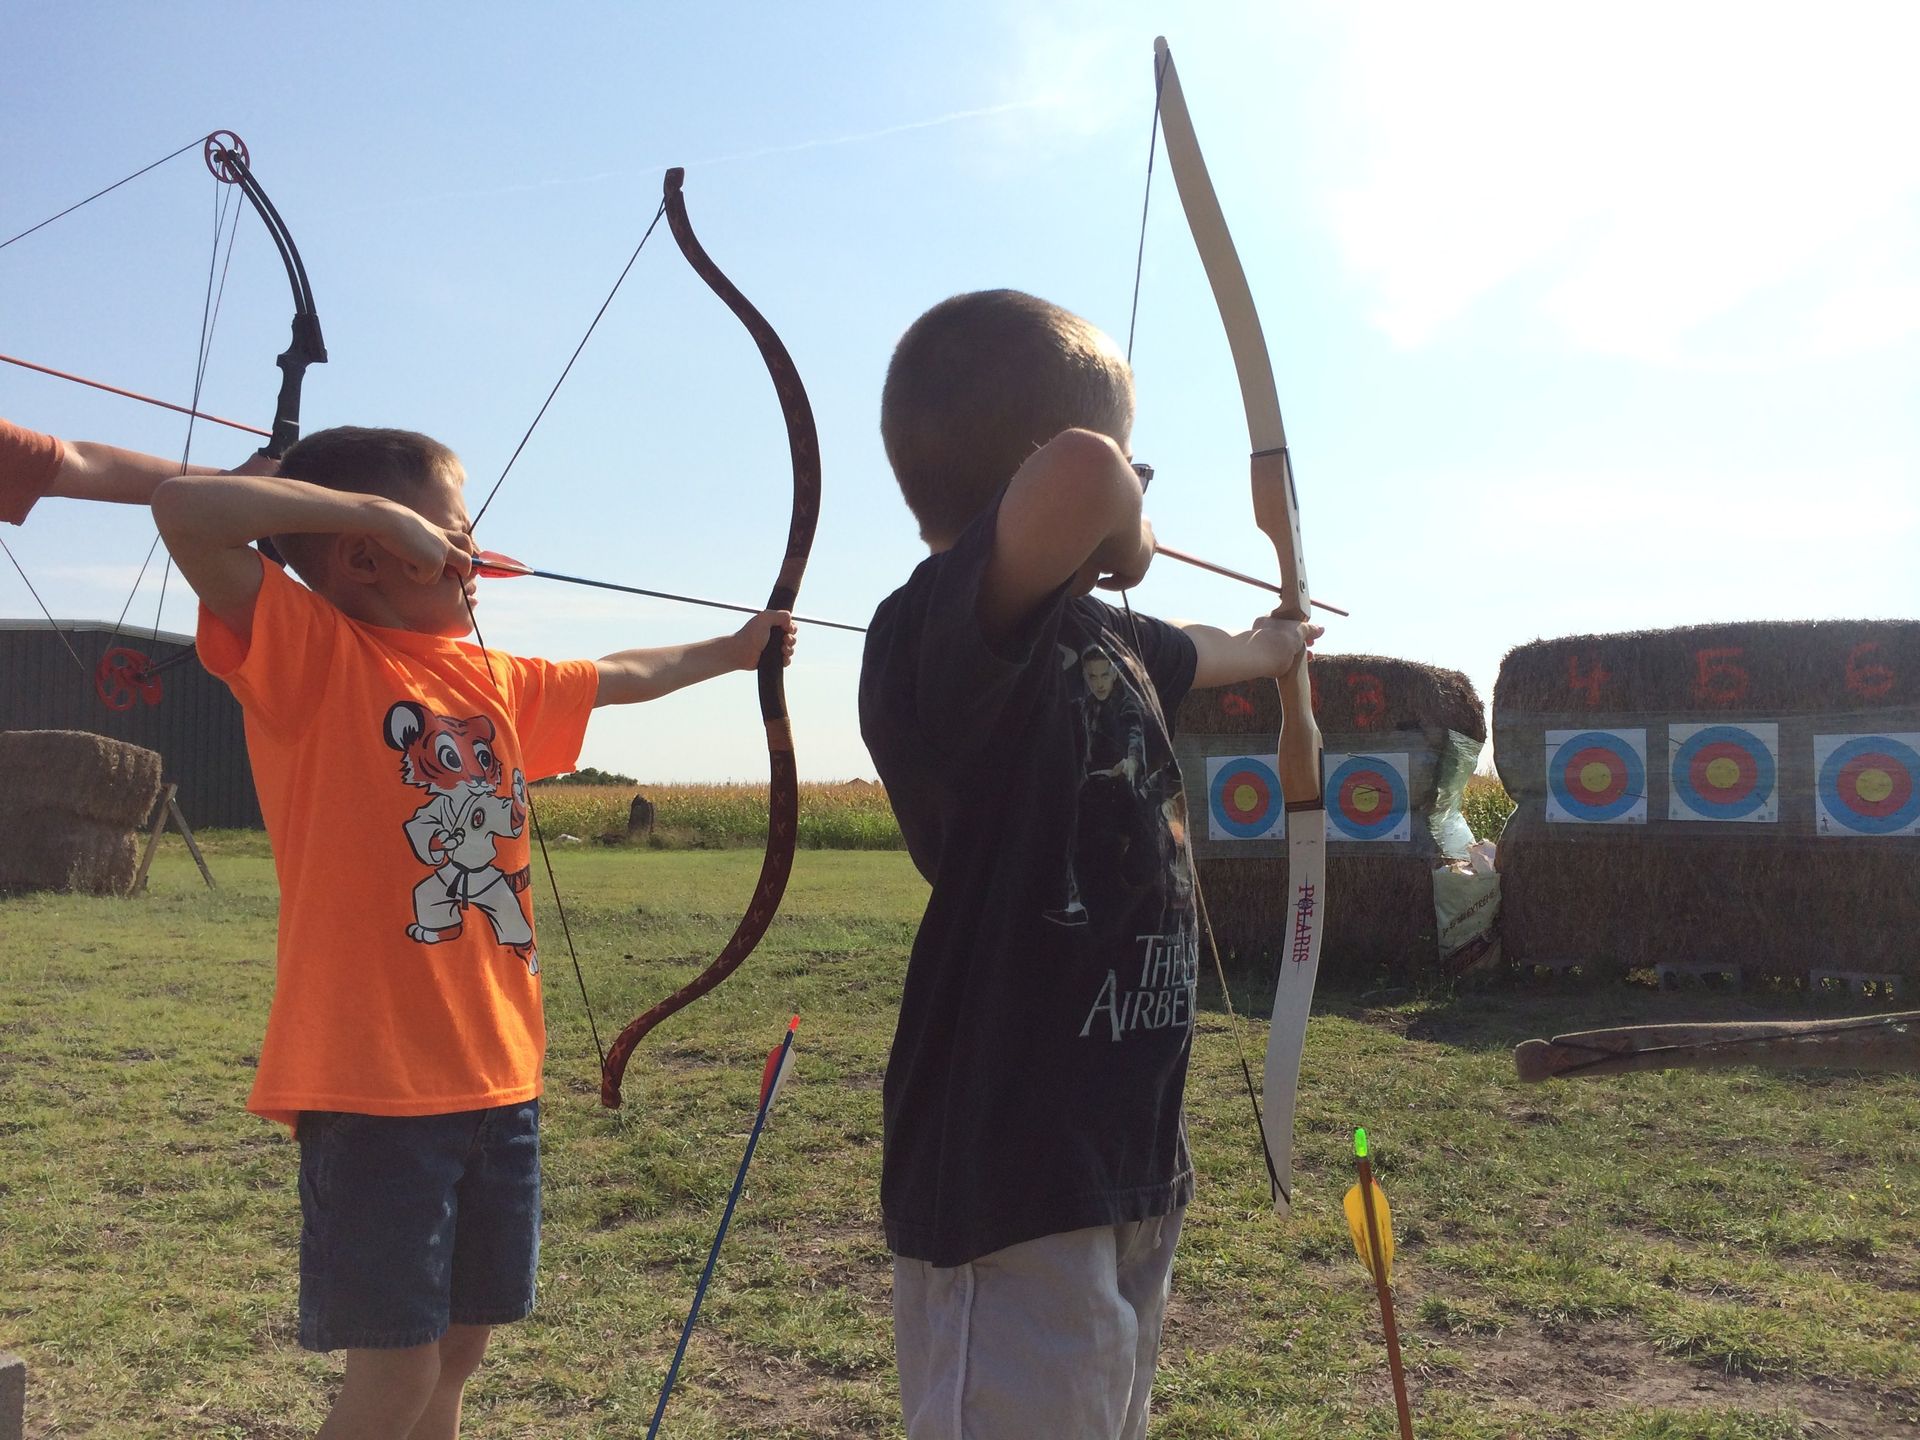 After School archery classes